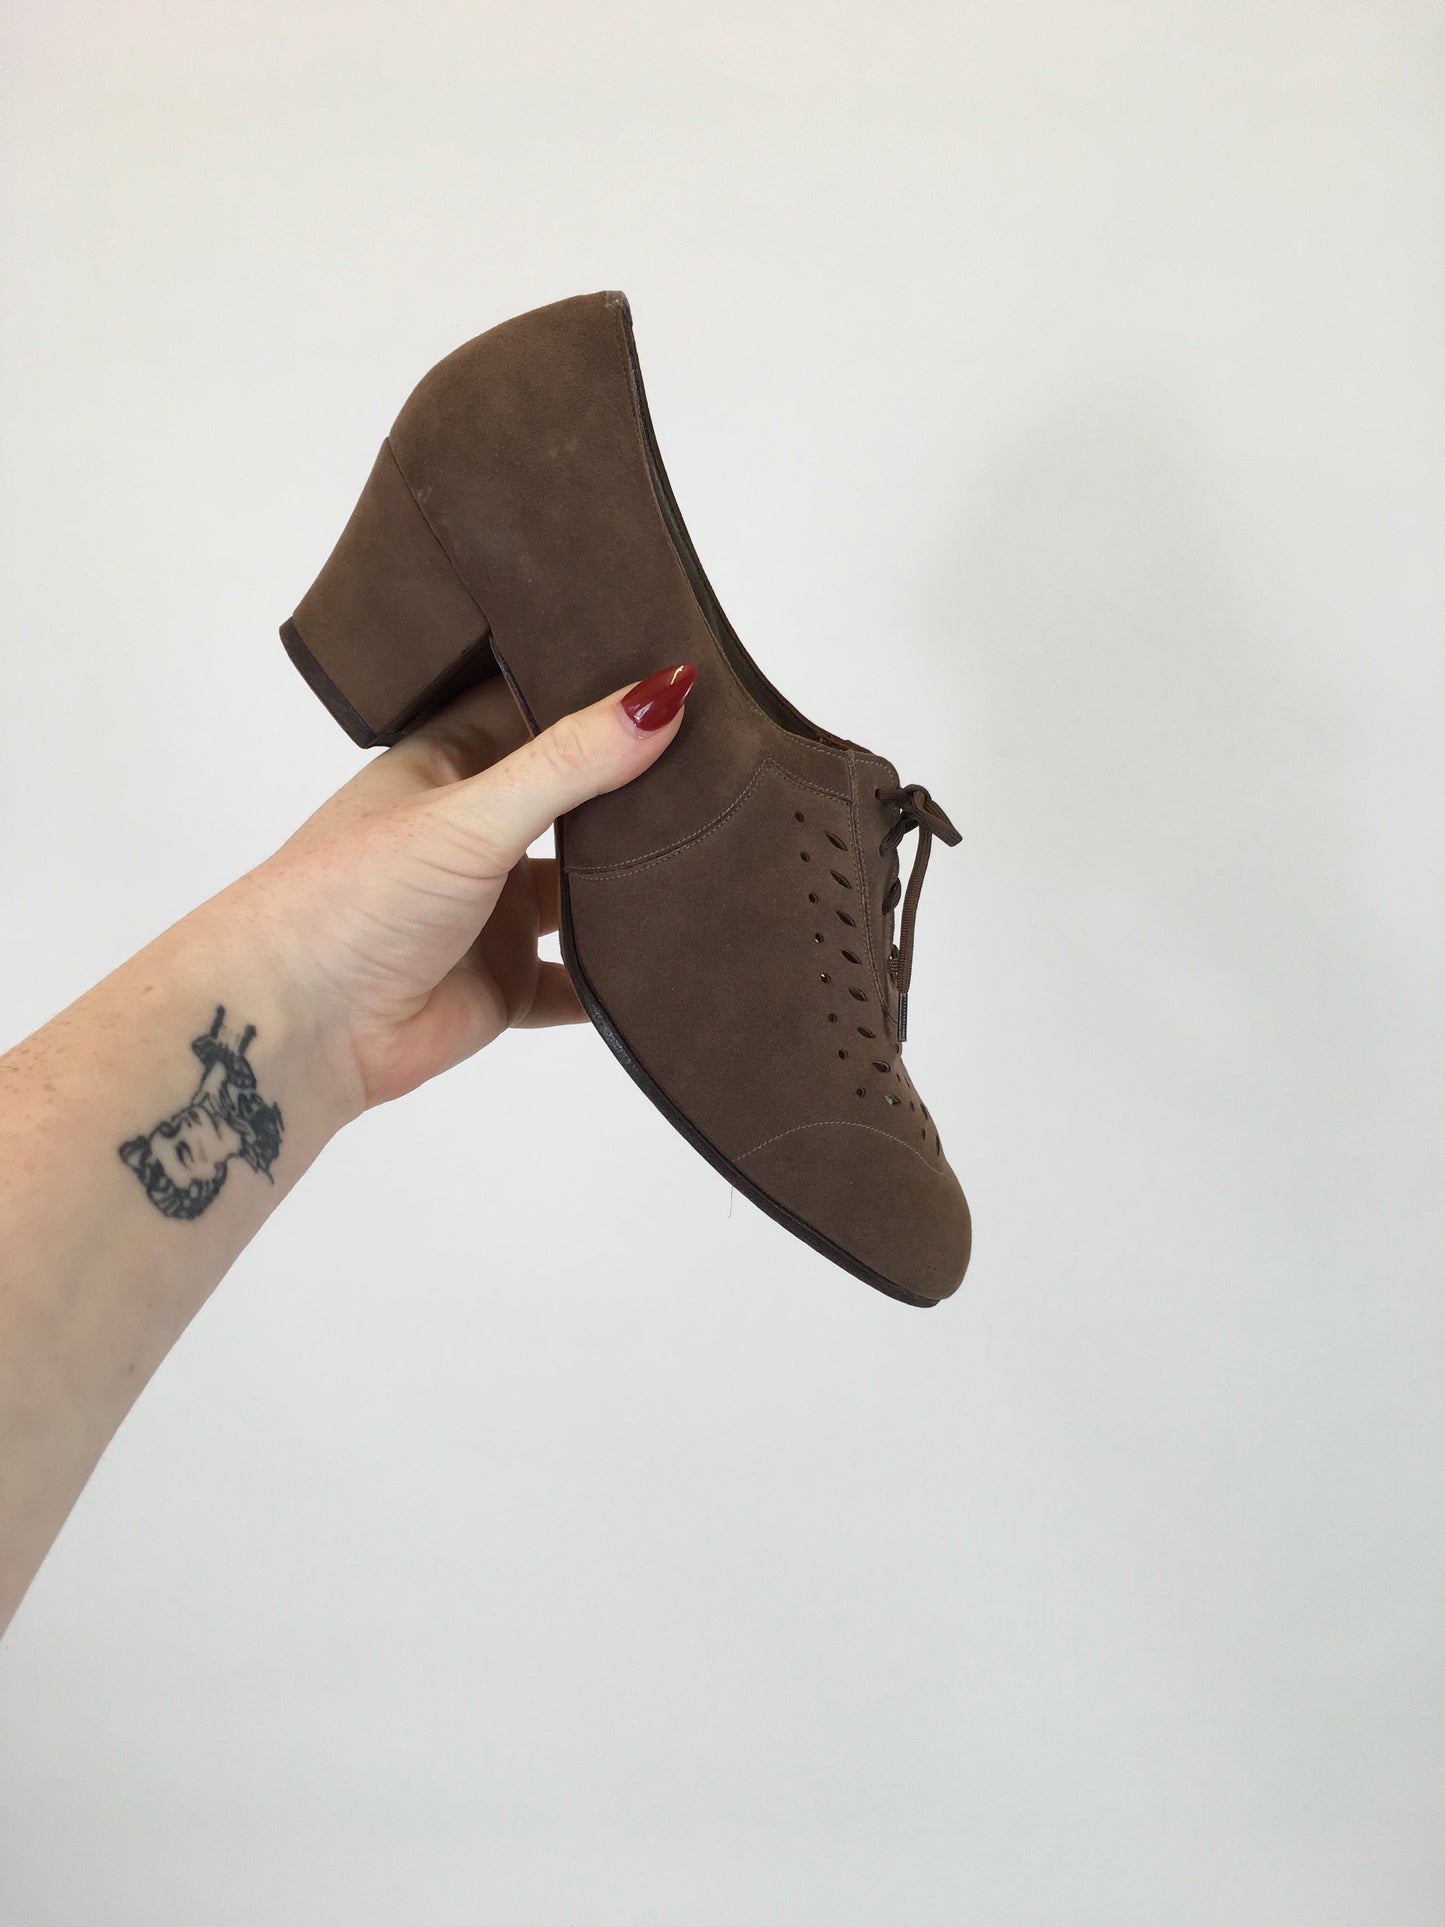 Original 1940's Darling Suede Lace Up Shoes - In A Soft Brown With Lovely Details (Approx Size UK 7)